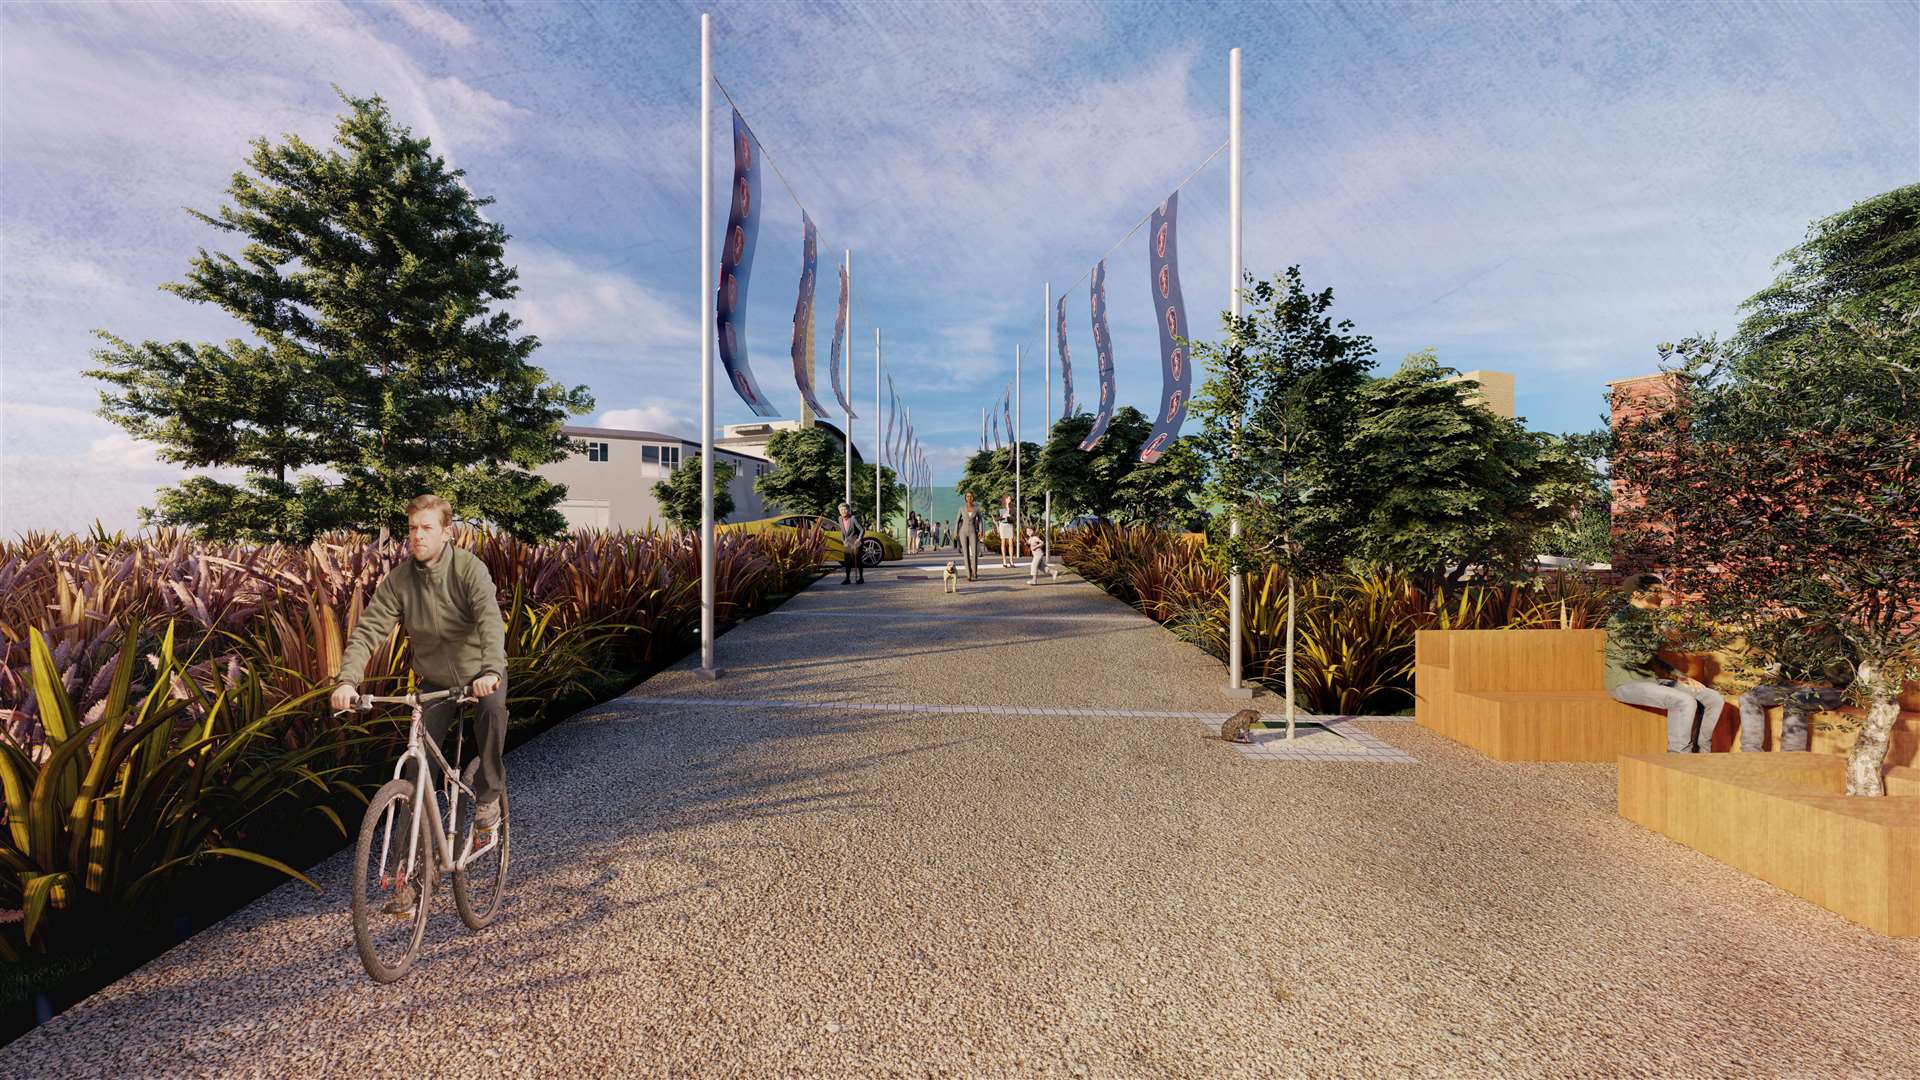 12 new flag poles hanging banners from steel cables have been proposed